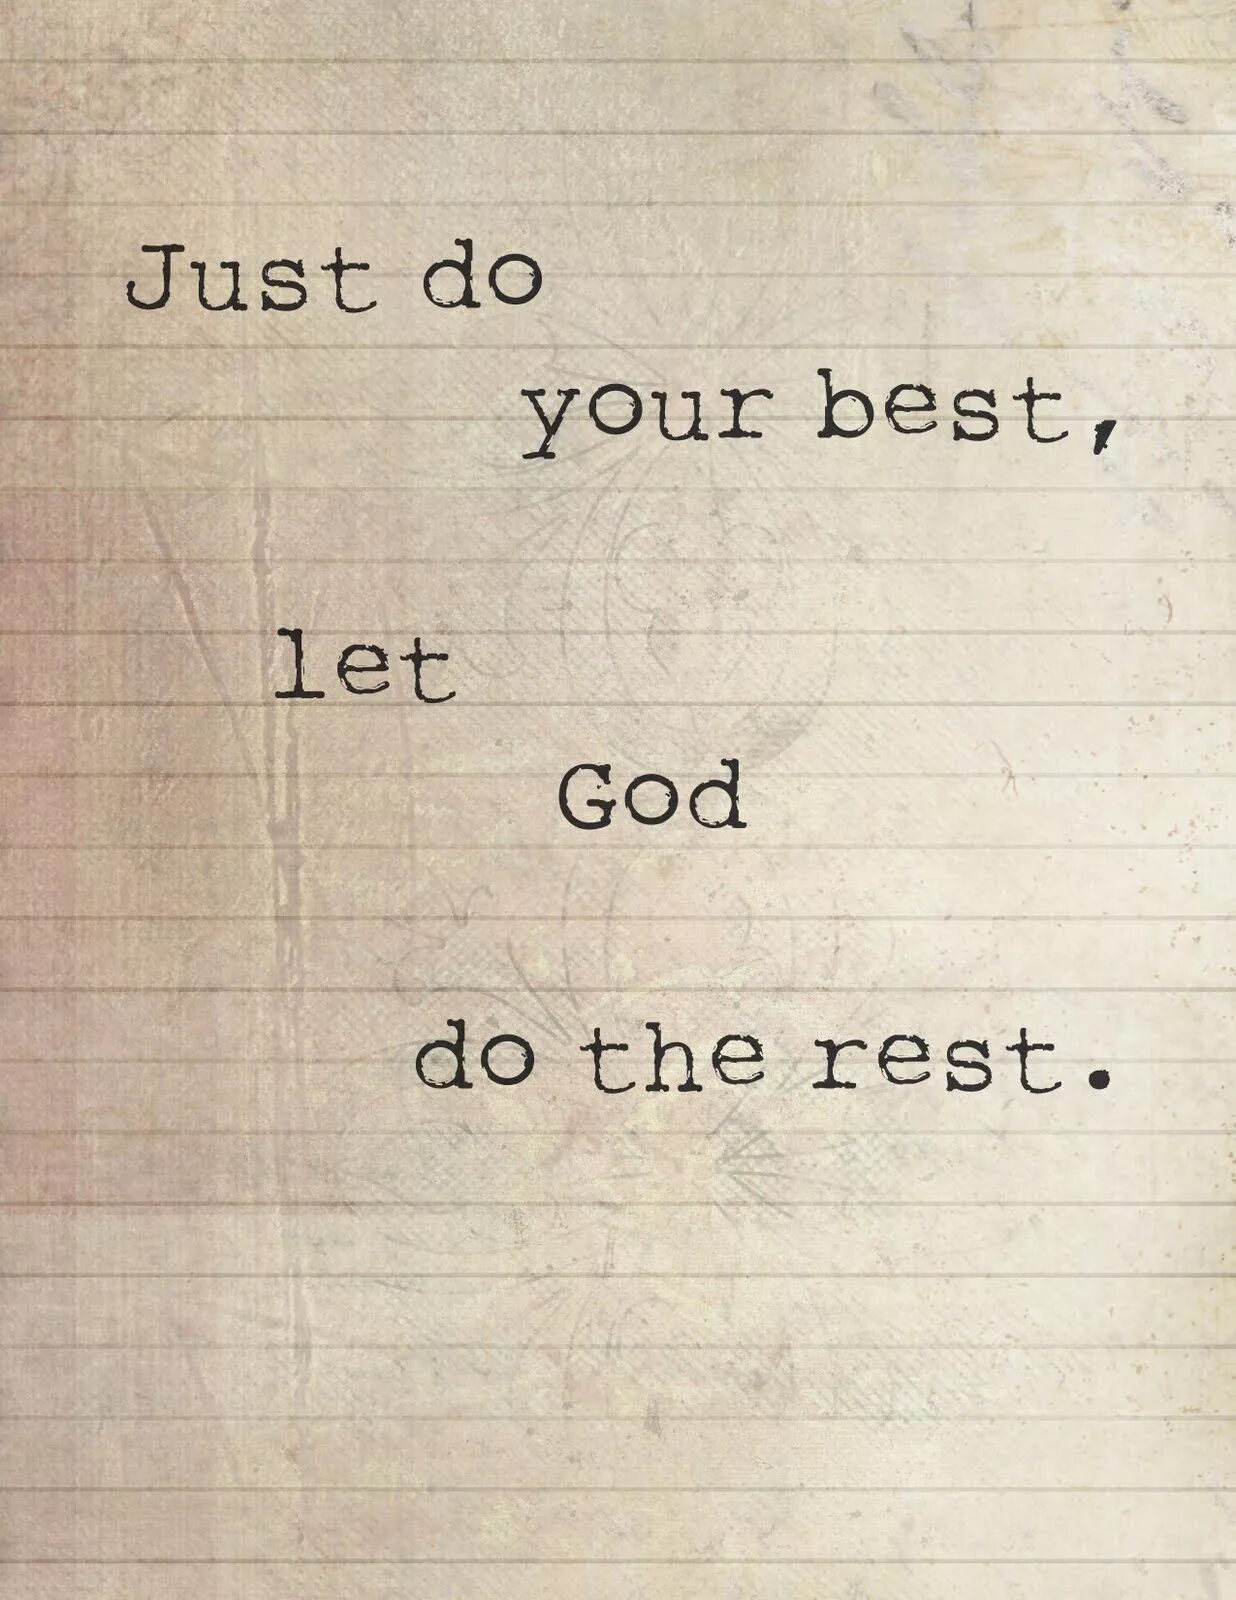 Do your best. Do your best and Let God do the rest.